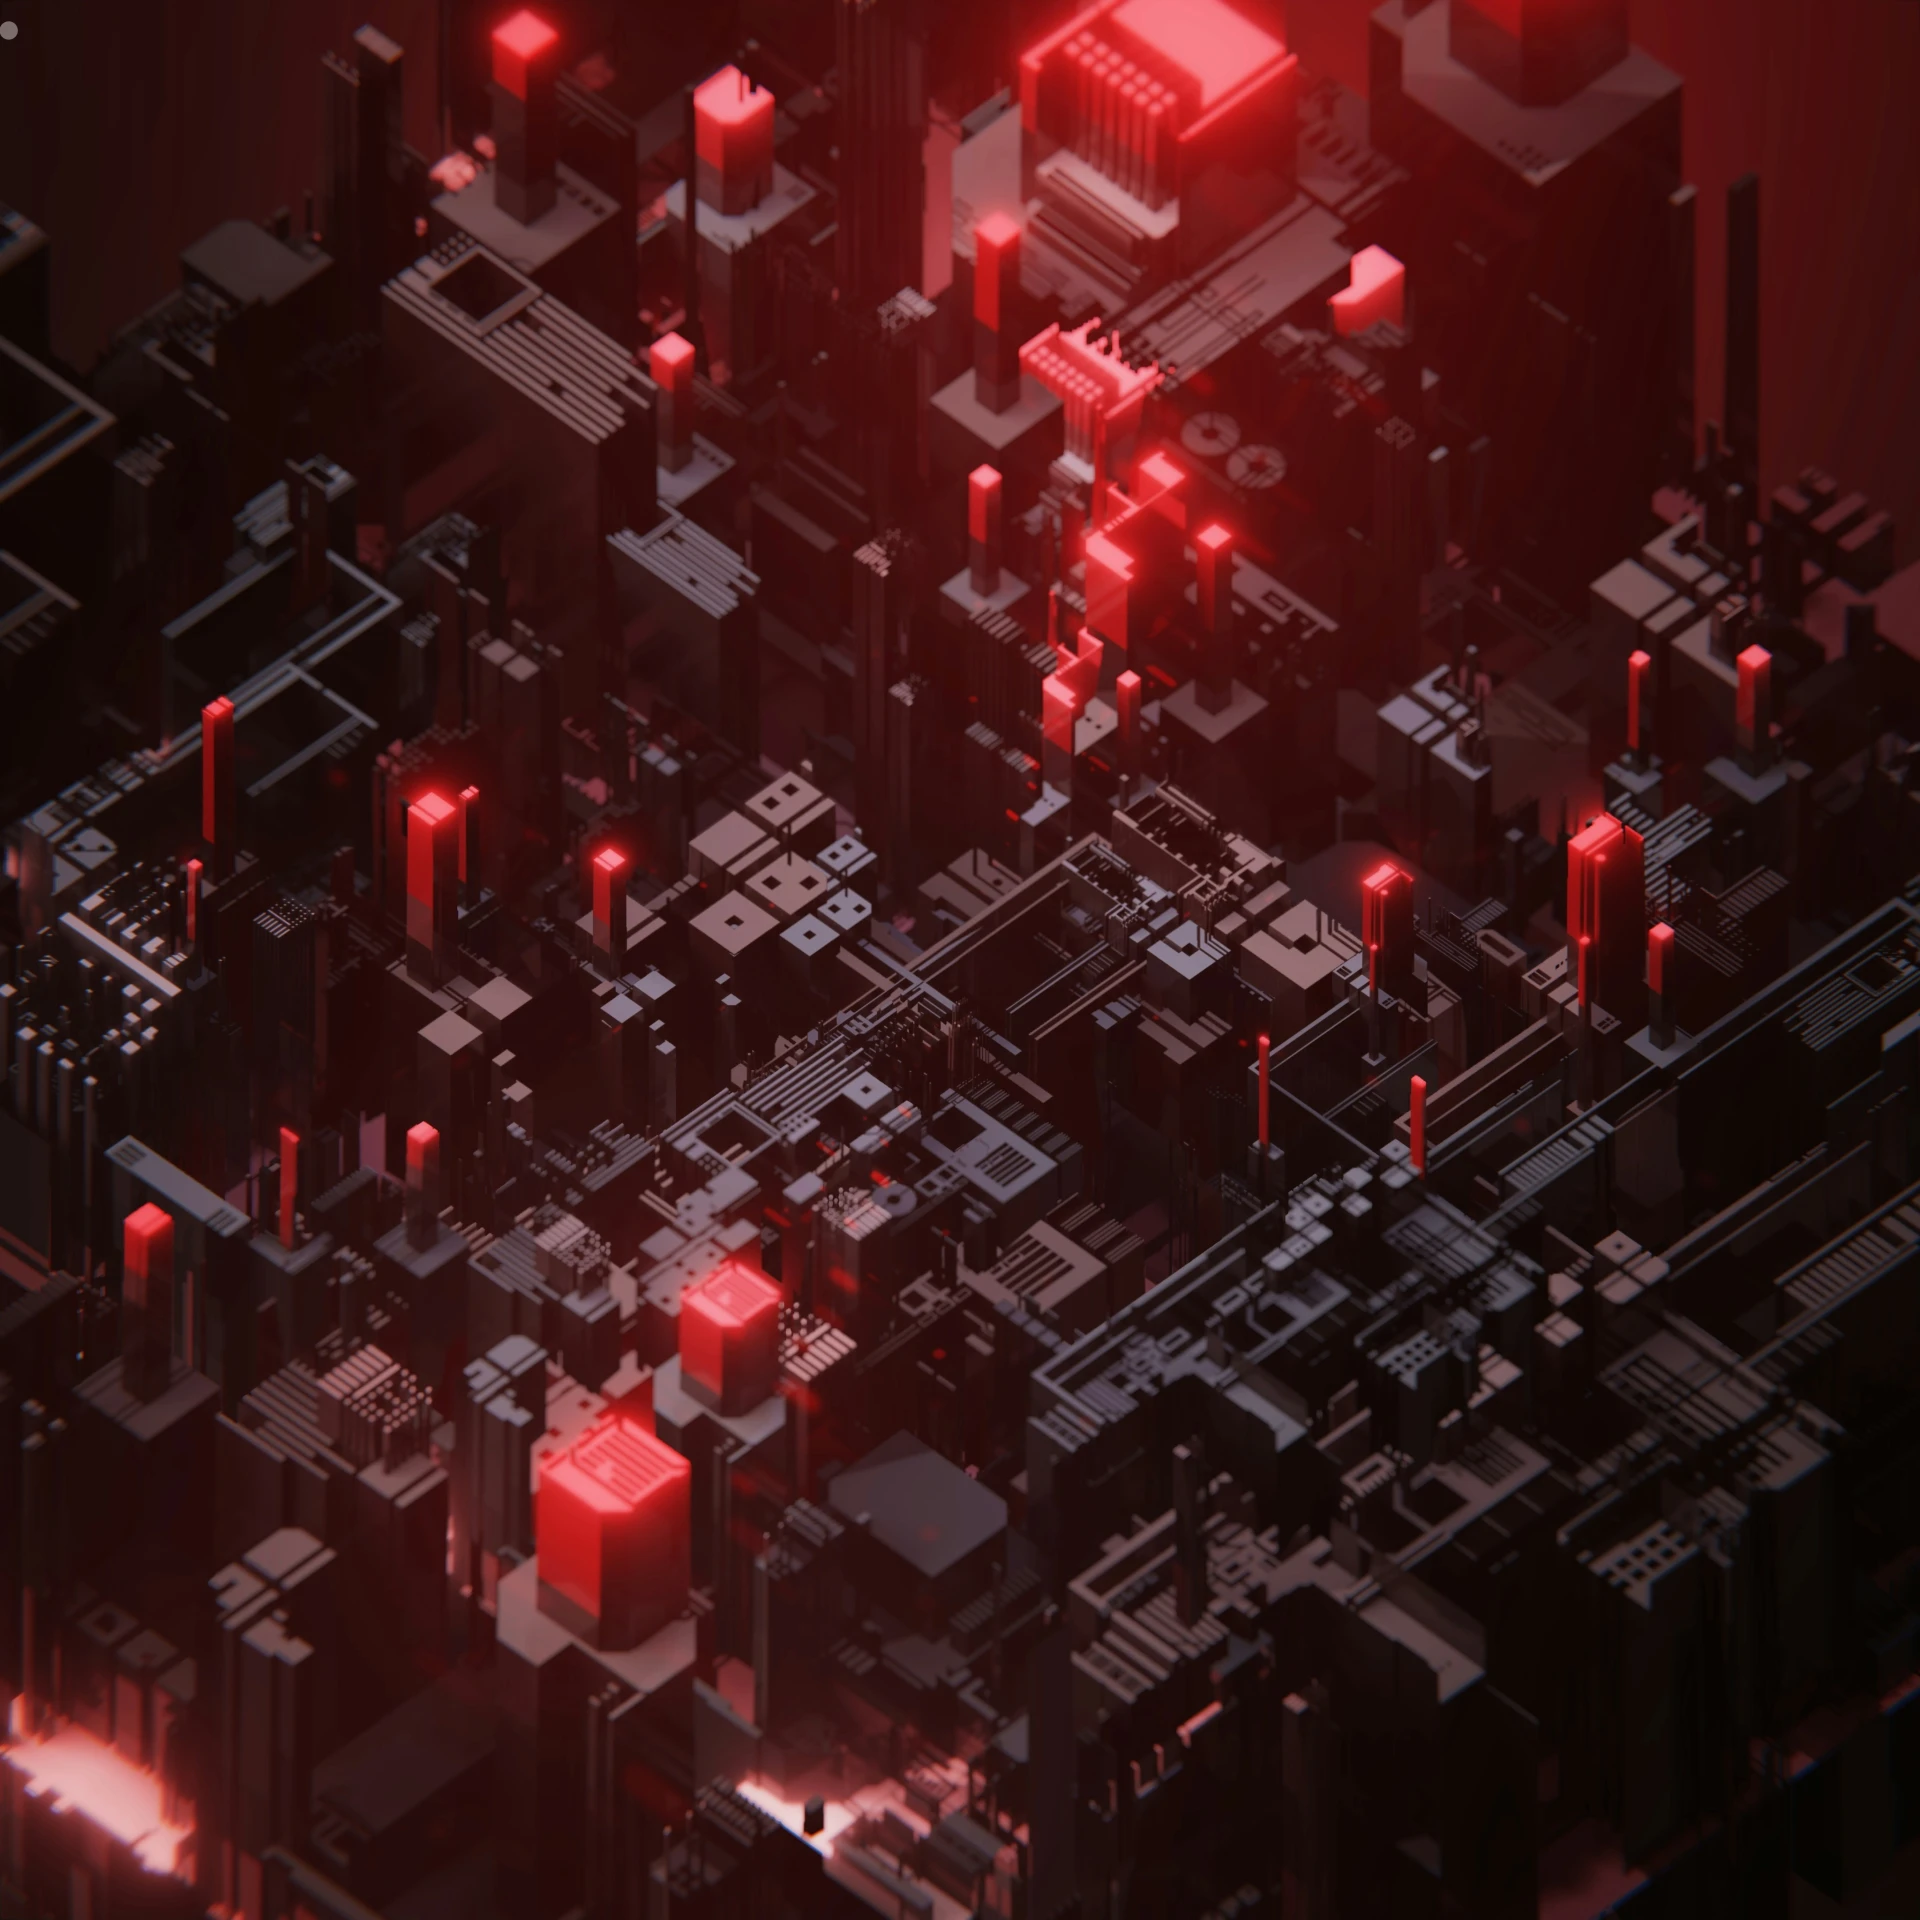 a black and red digital design consisting of many objects